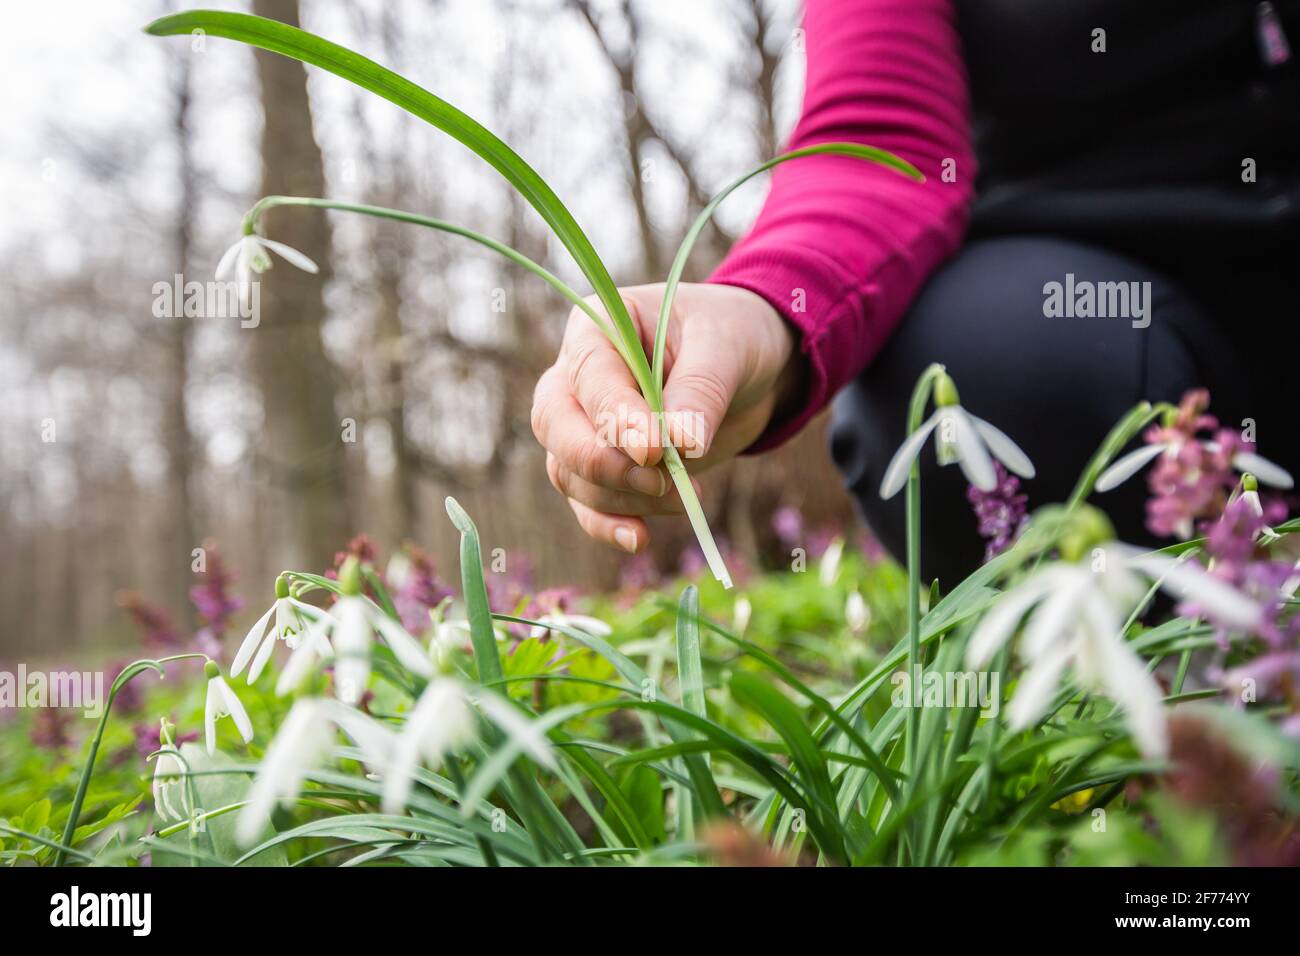 Woman hand picking up or harvesting very rare flowers in the national park or botanical garden, environmental concept Stock Photo